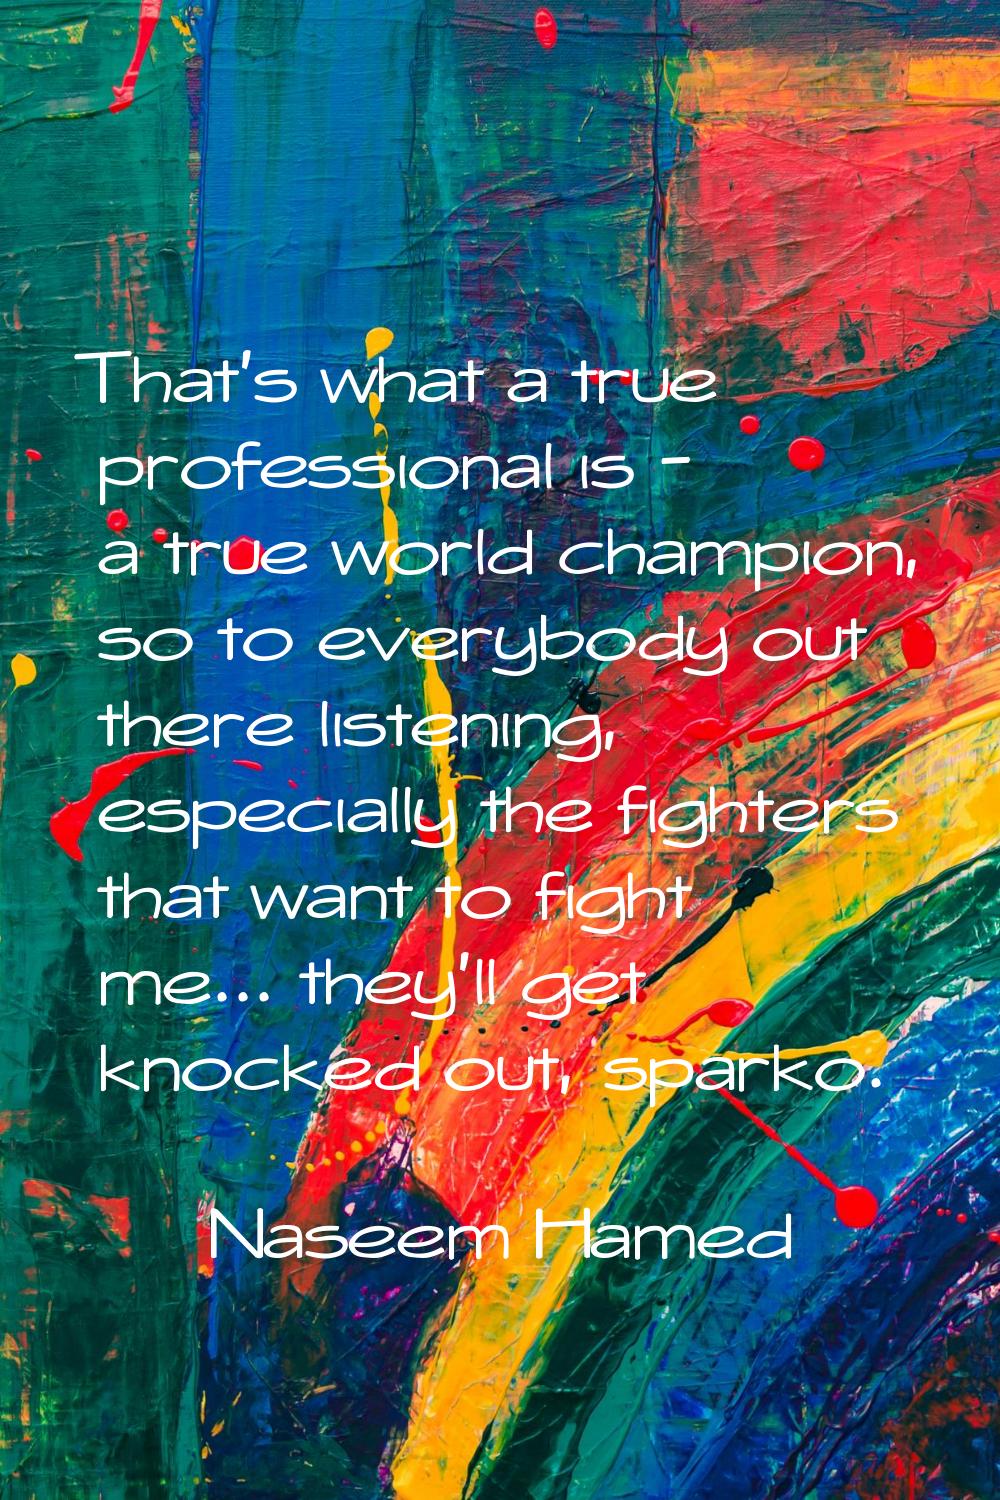 That's what a true professional is - a true world champion, so to everybody out there listening, es